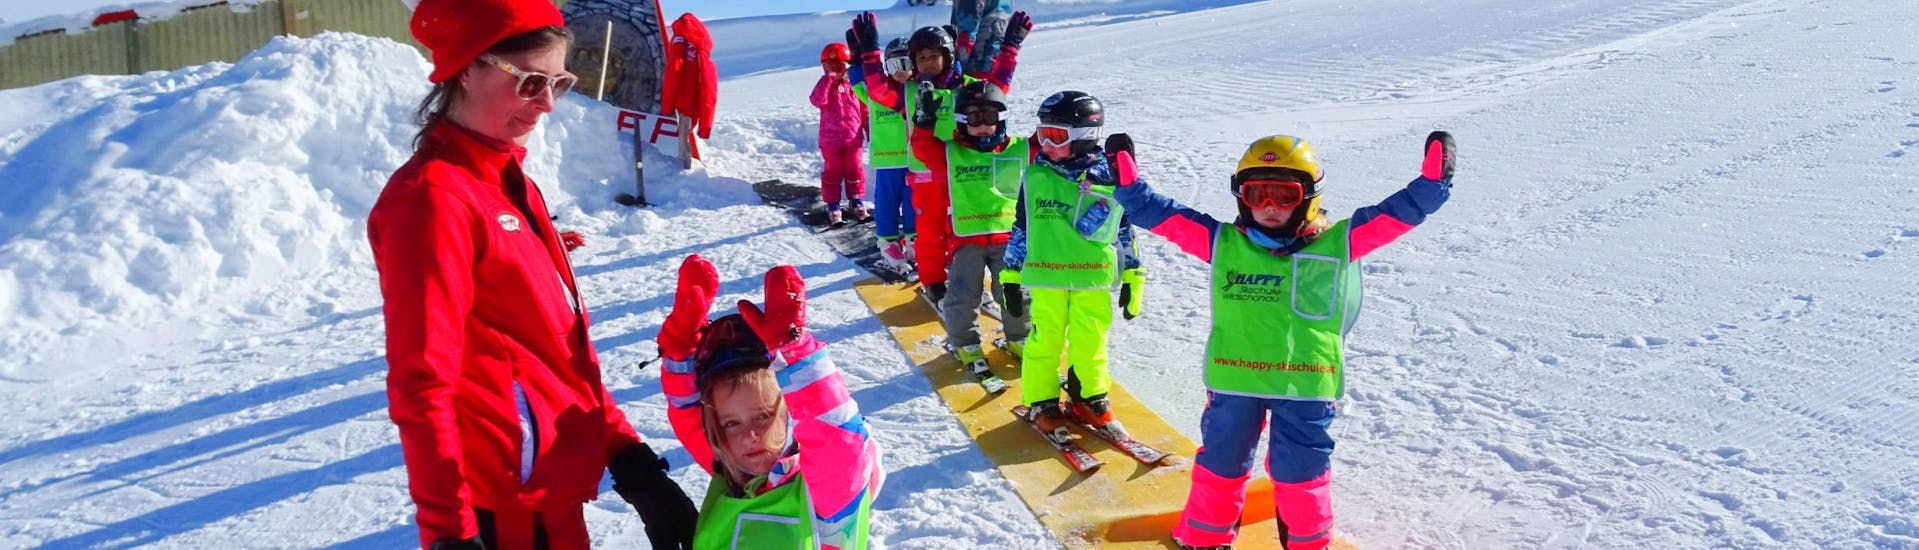 Kids Ski Lessons (5-13 y.) for Beginners - Half-Day.